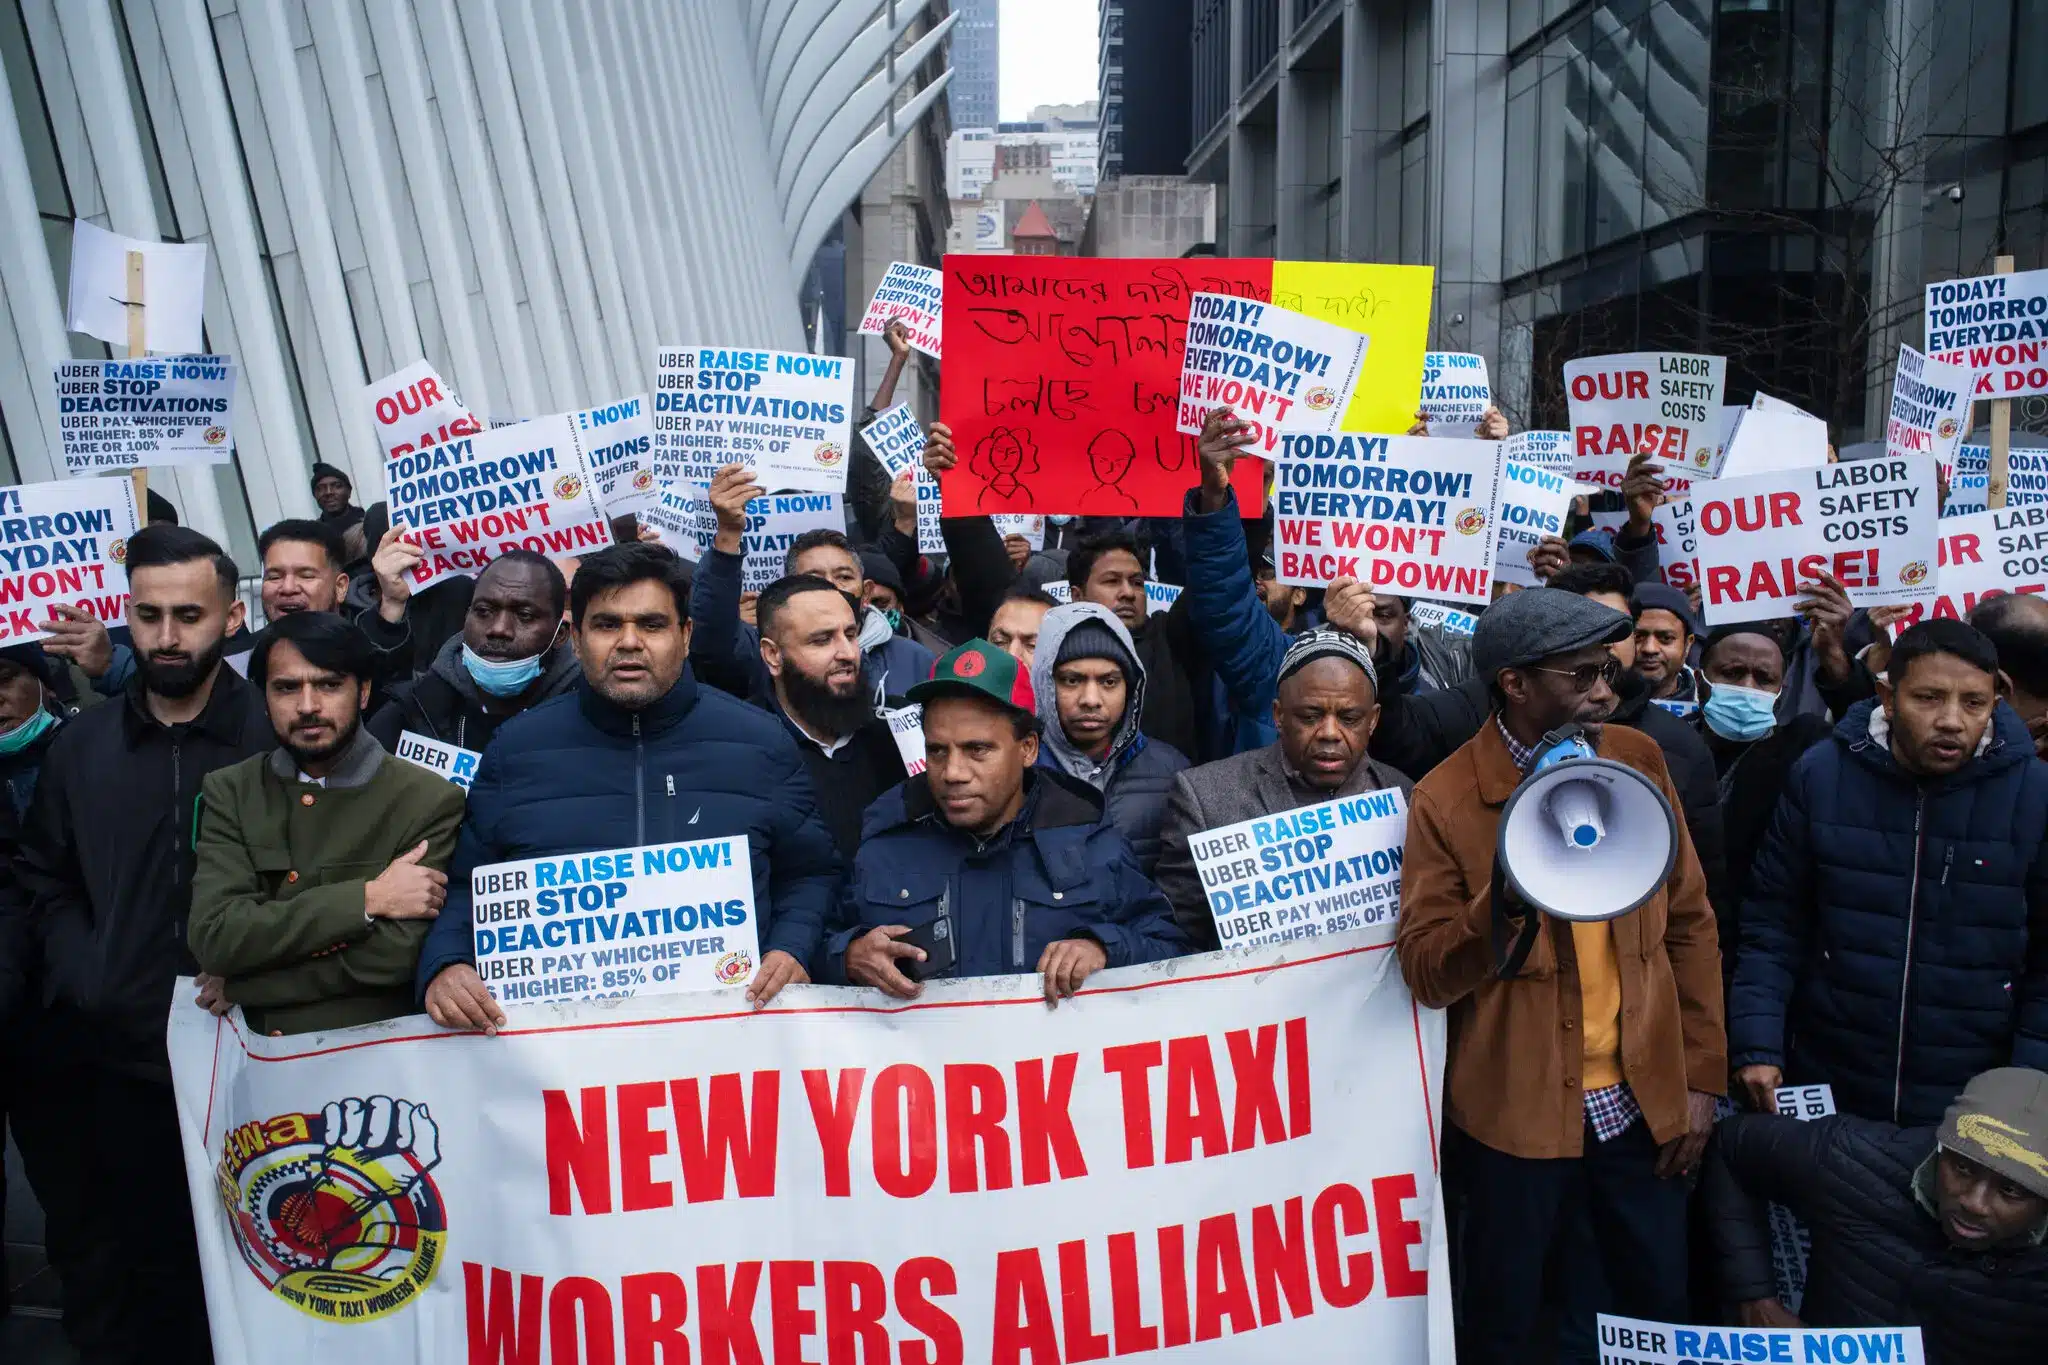 Uber and Lyft drivers now earn less in fares and tips than taxi drivers – Big Apple Taxi